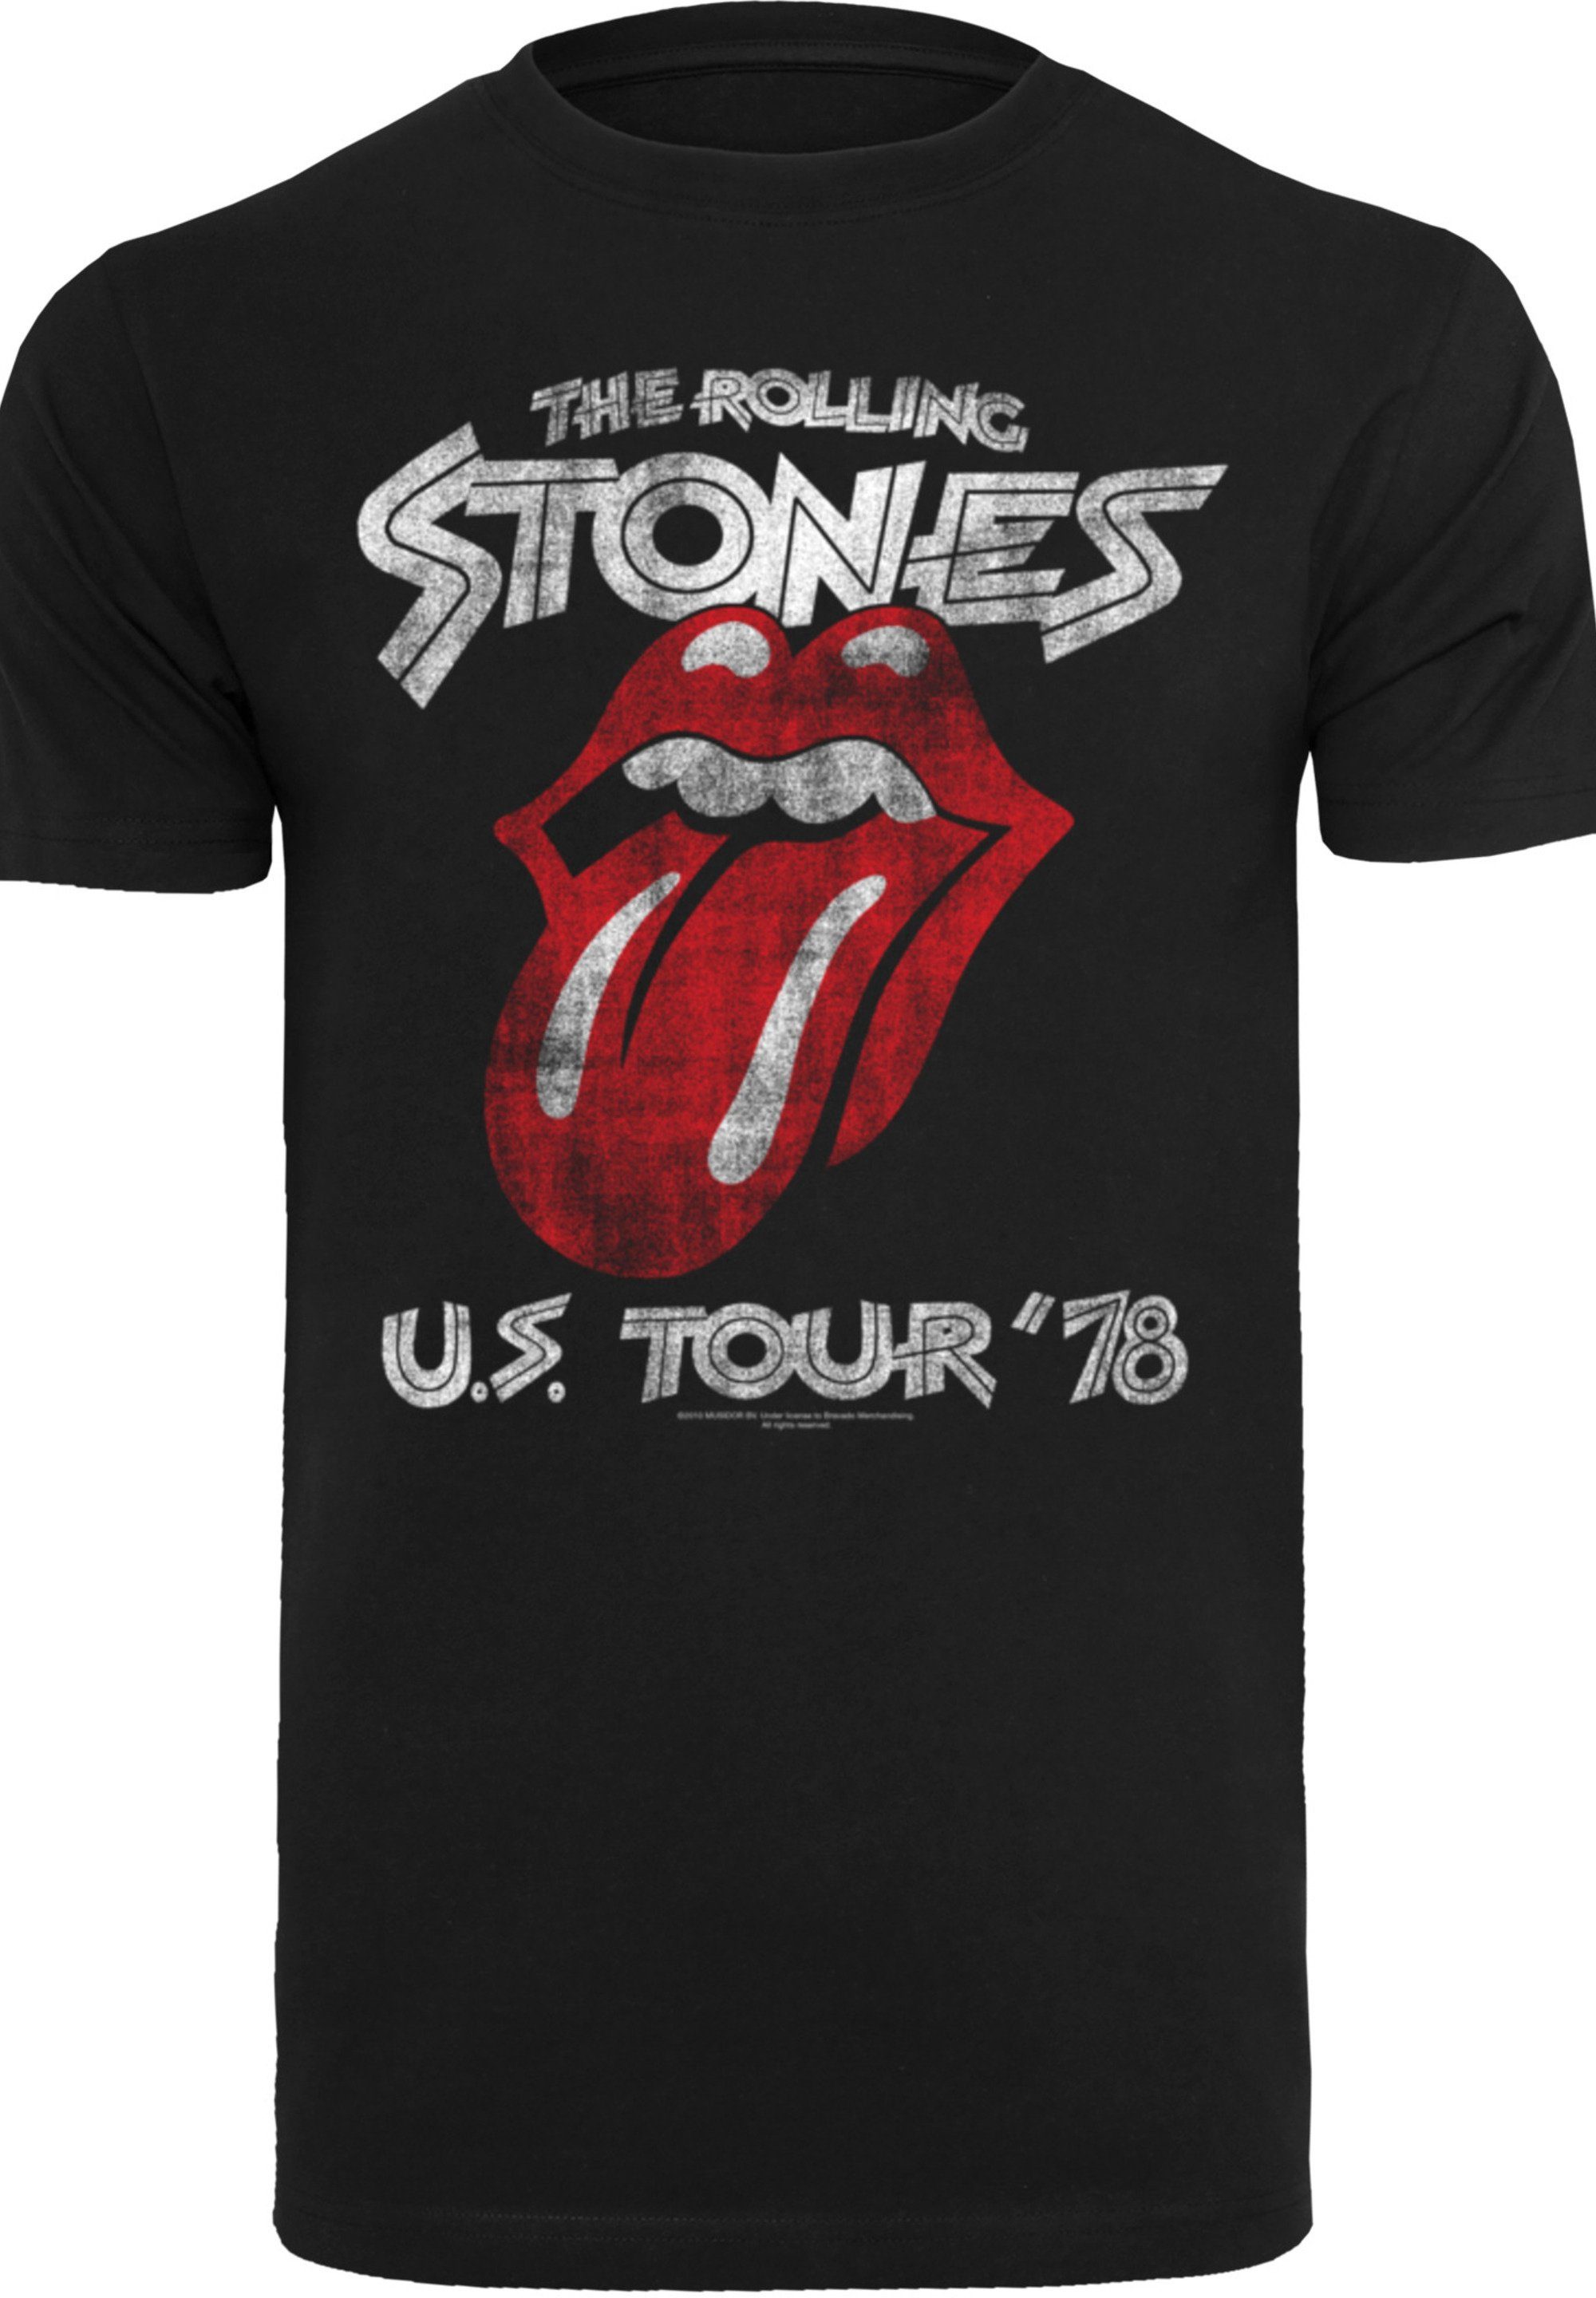 T-Shirt US F4NT4STIC Stones Rolling Rock '78 Print Band Front Tour The